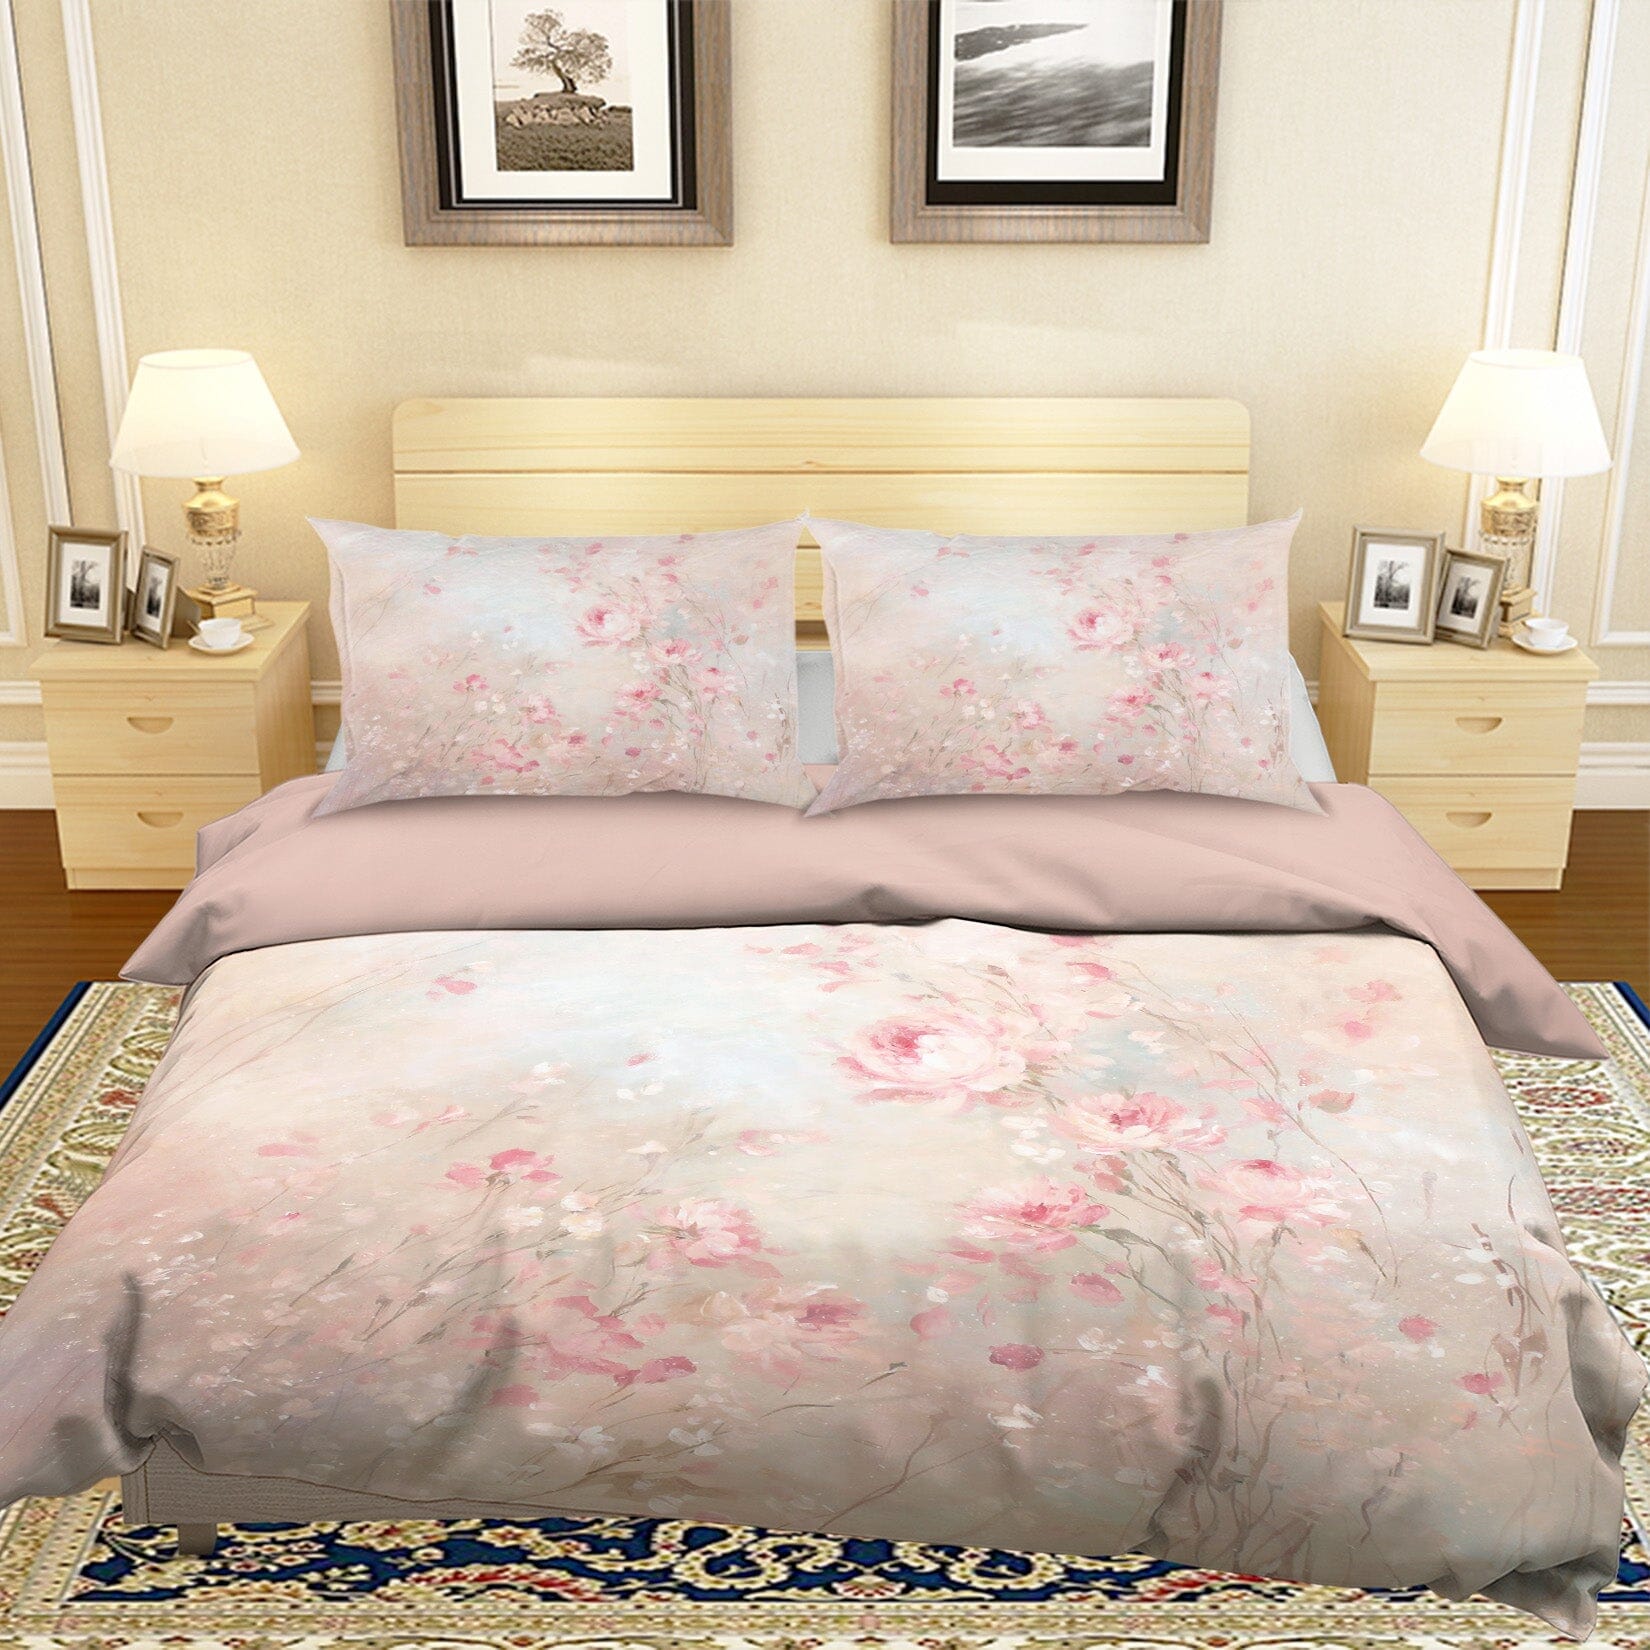 3D Pink Rose 026 Debi Coules Bedding Bed Pillowcases Quilt Quiet Covers AJ Creativity Home 